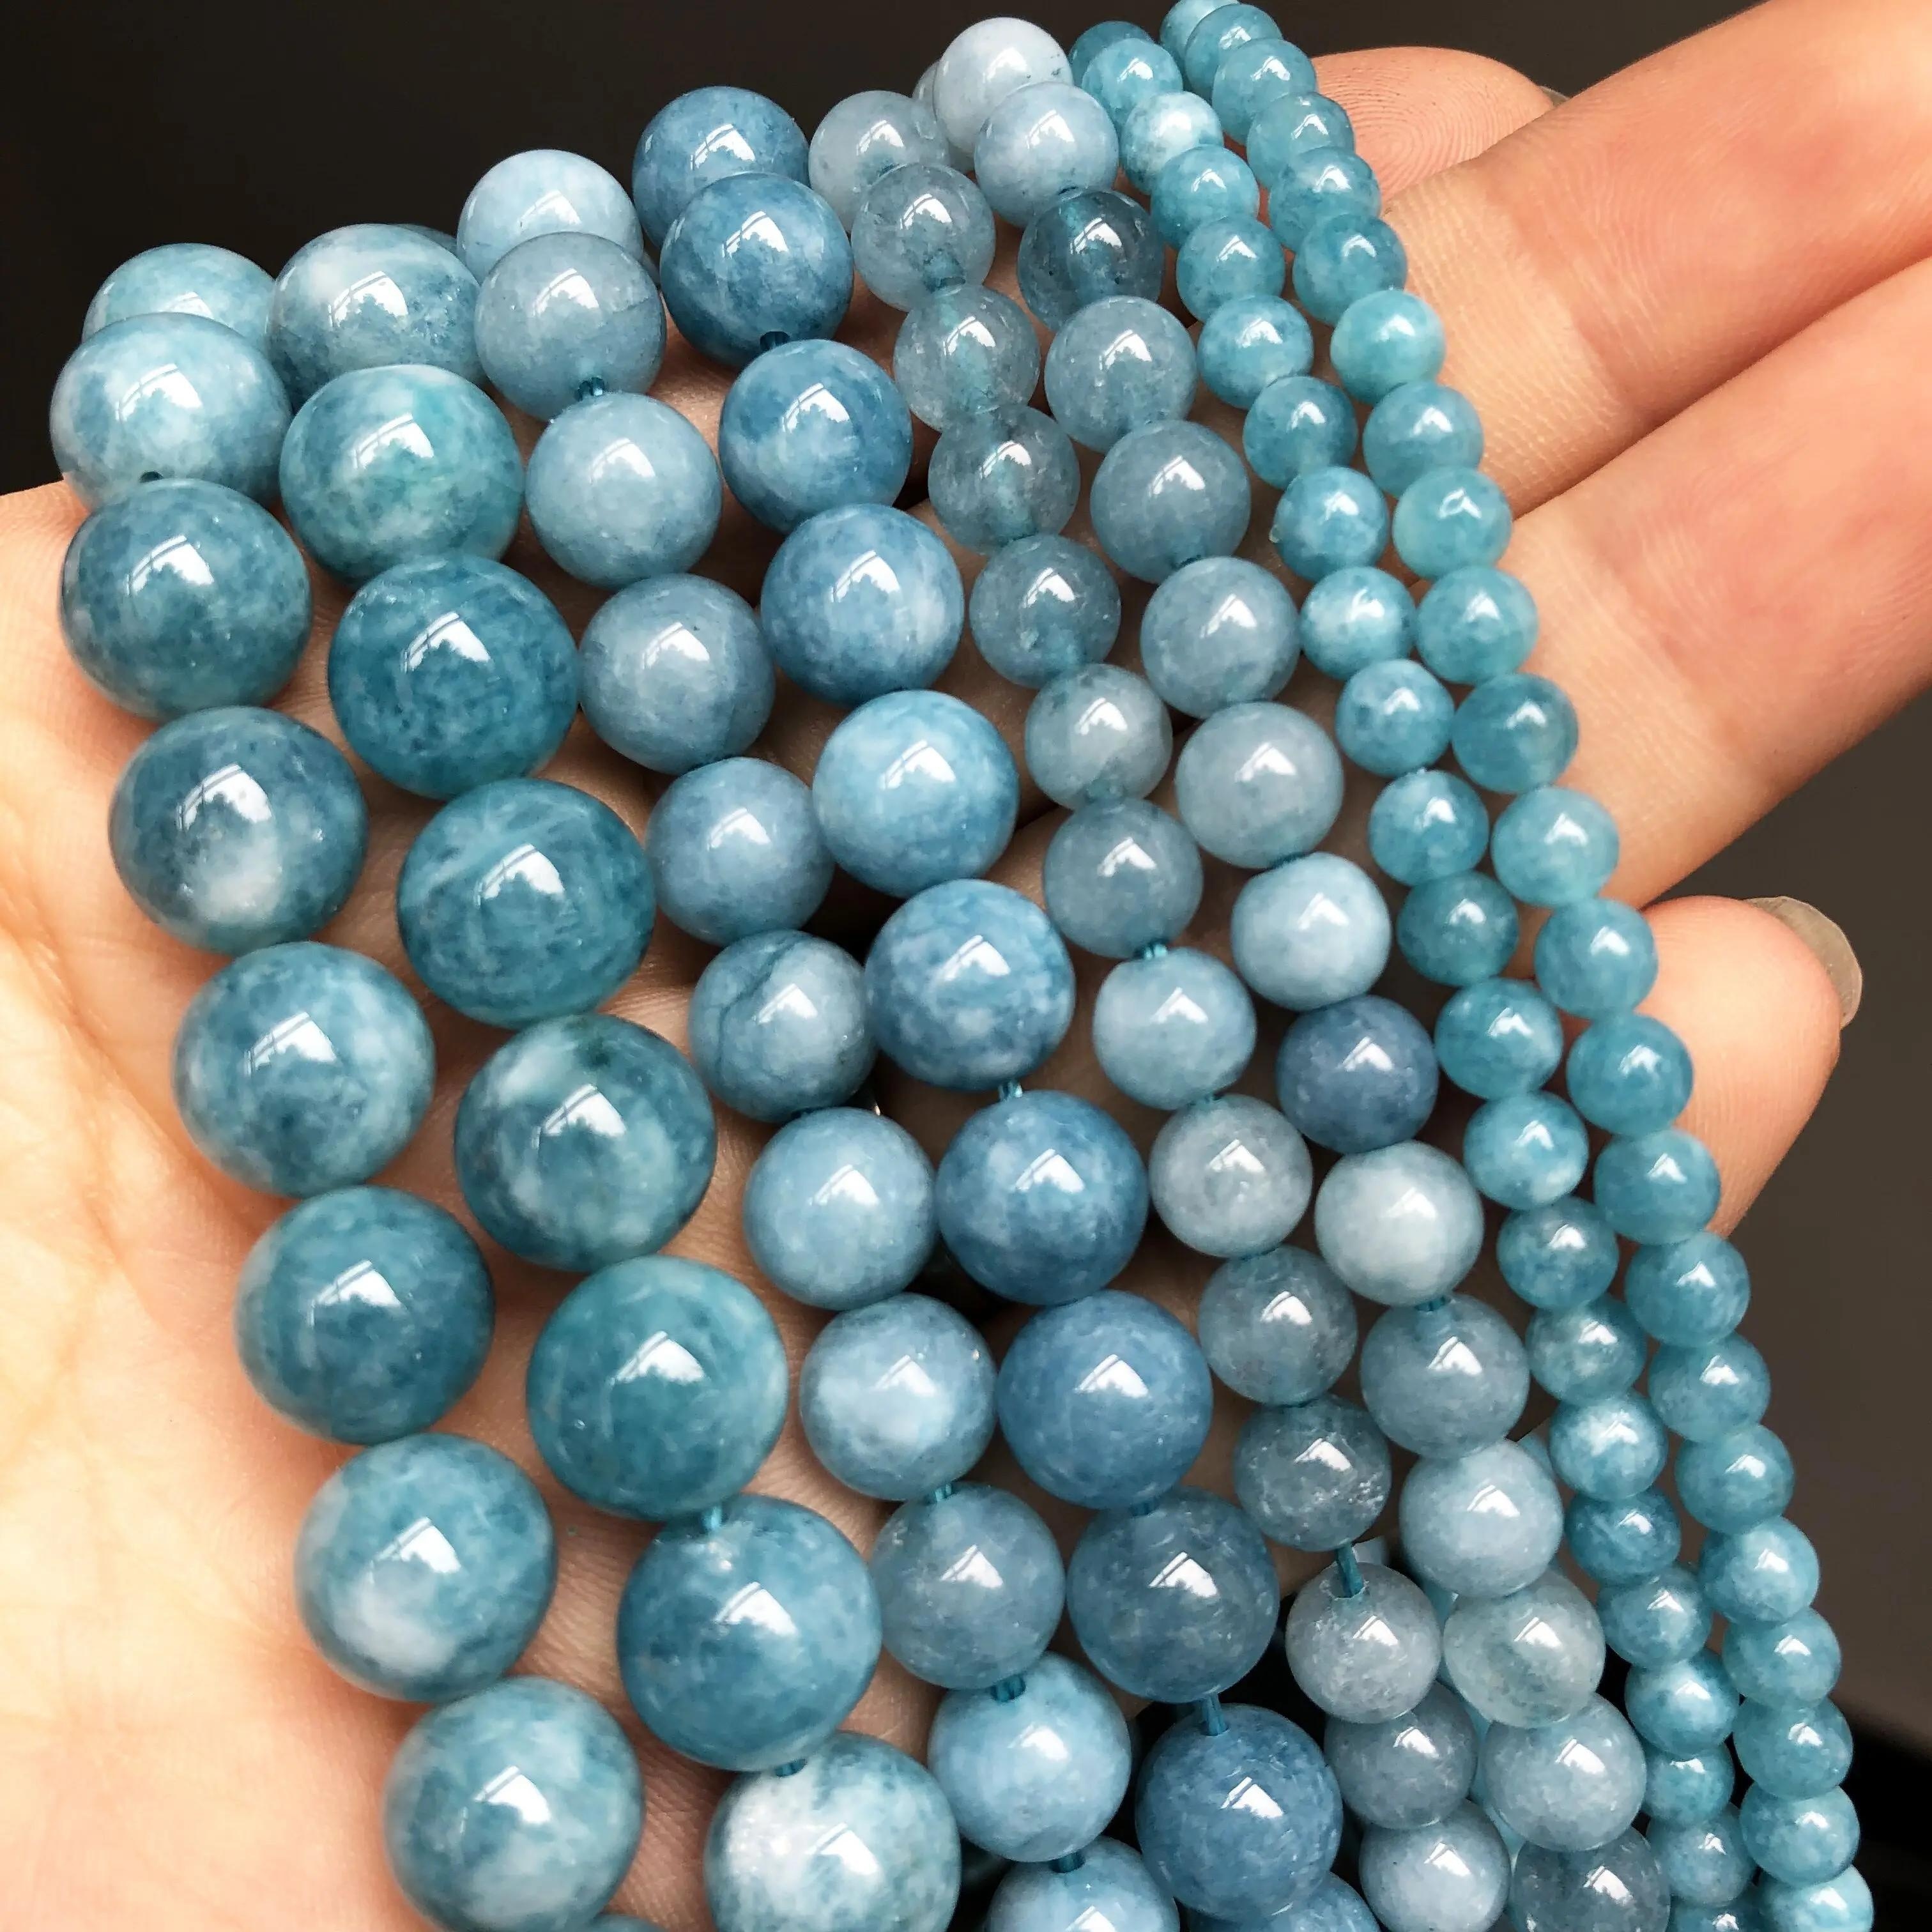 

Natural Stone Deep Blue Chalcedony Beads Round Loose Spacer Beads For Jewelry Making Diy Handmade Bracelet Necklace 4/6/8/10mm